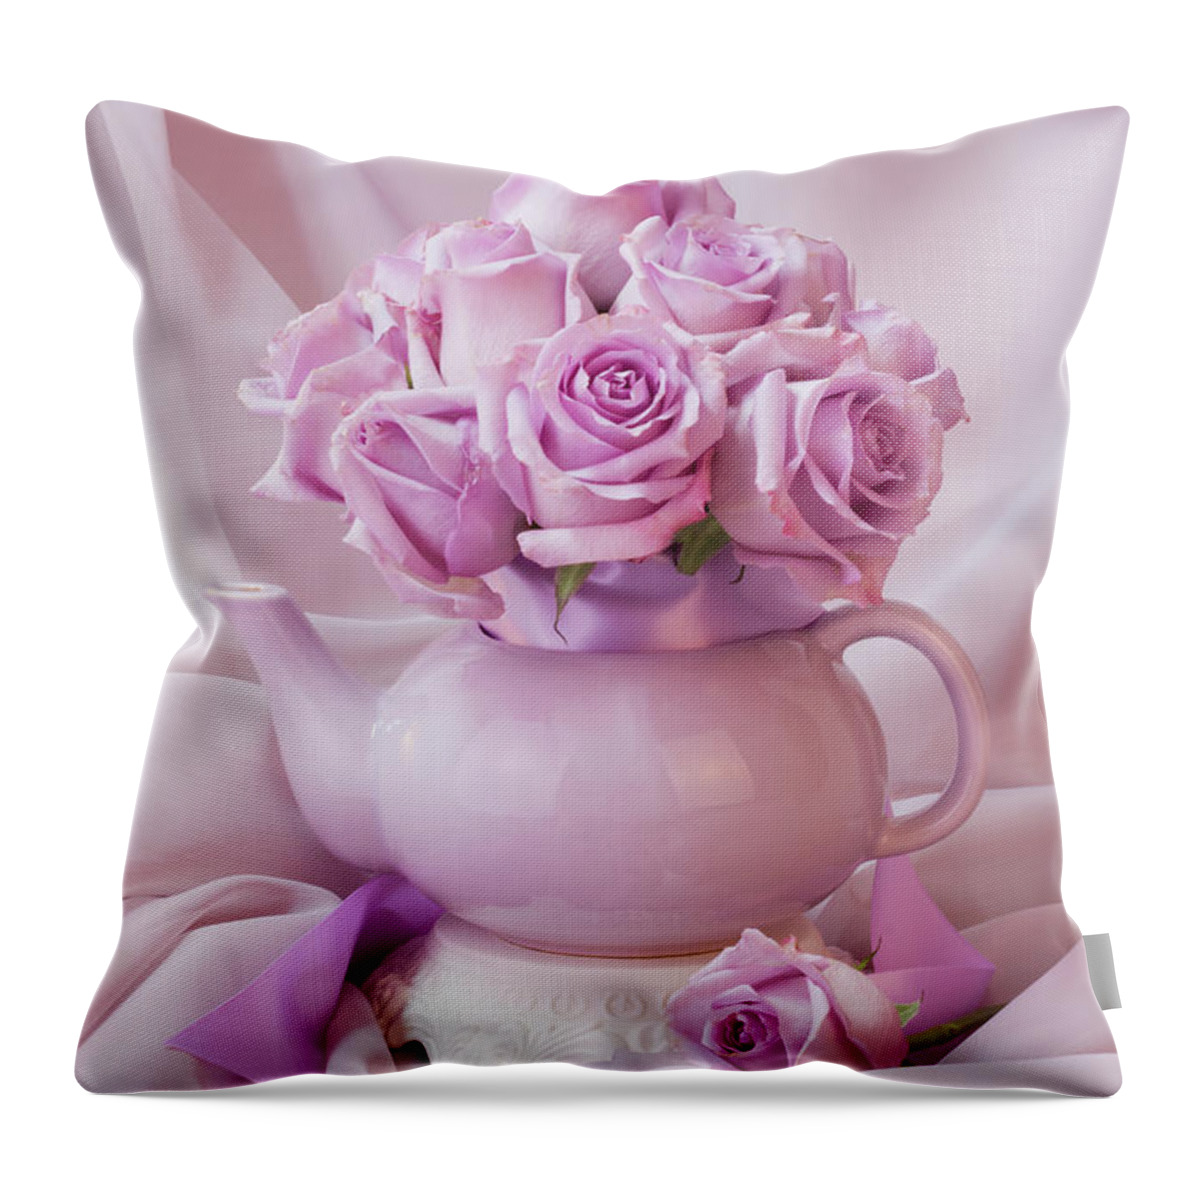 Roses Throw Pillow featuring the photograph A Tea Pot Of Lavender Pink Roses by Sandra Foster